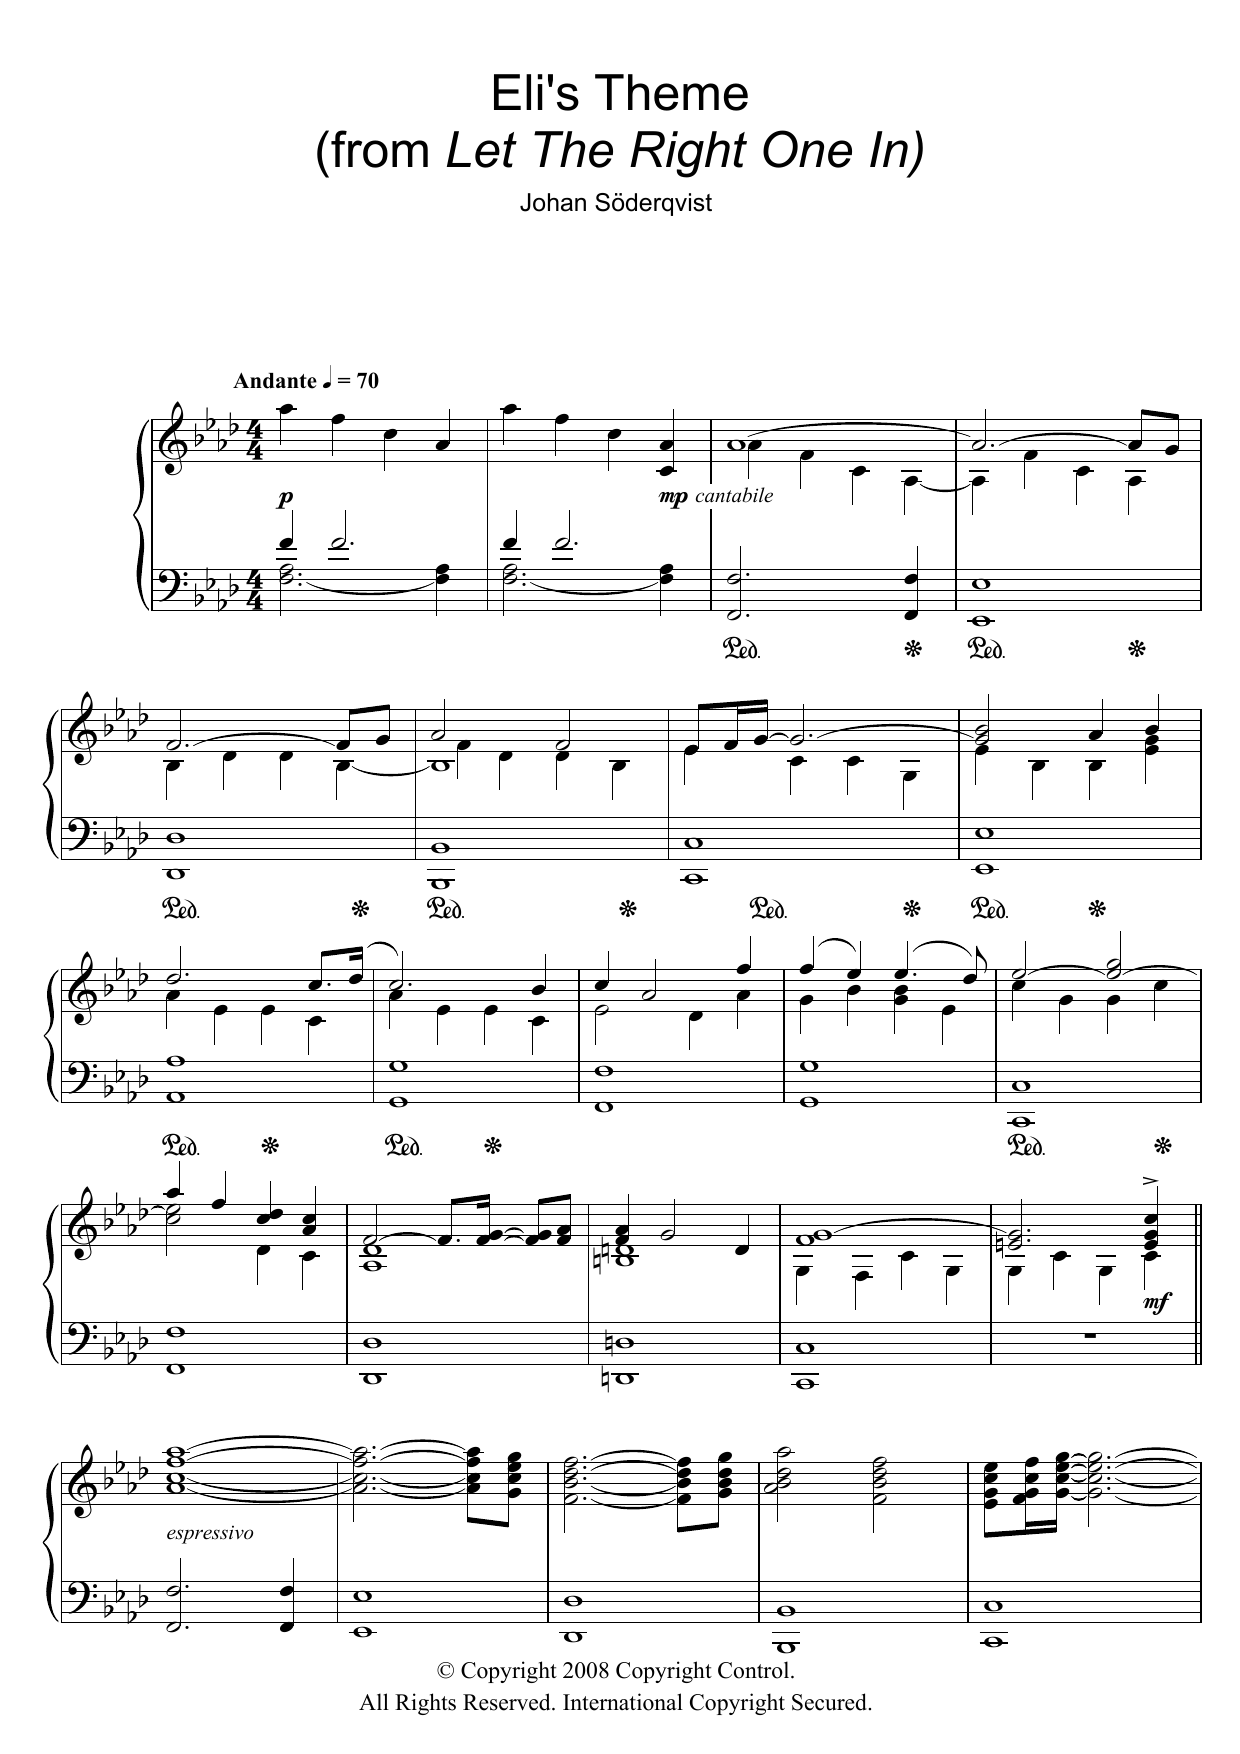 Download Johan Soderqvist Eli's Theme (from Let The Right One In) Sheet Music